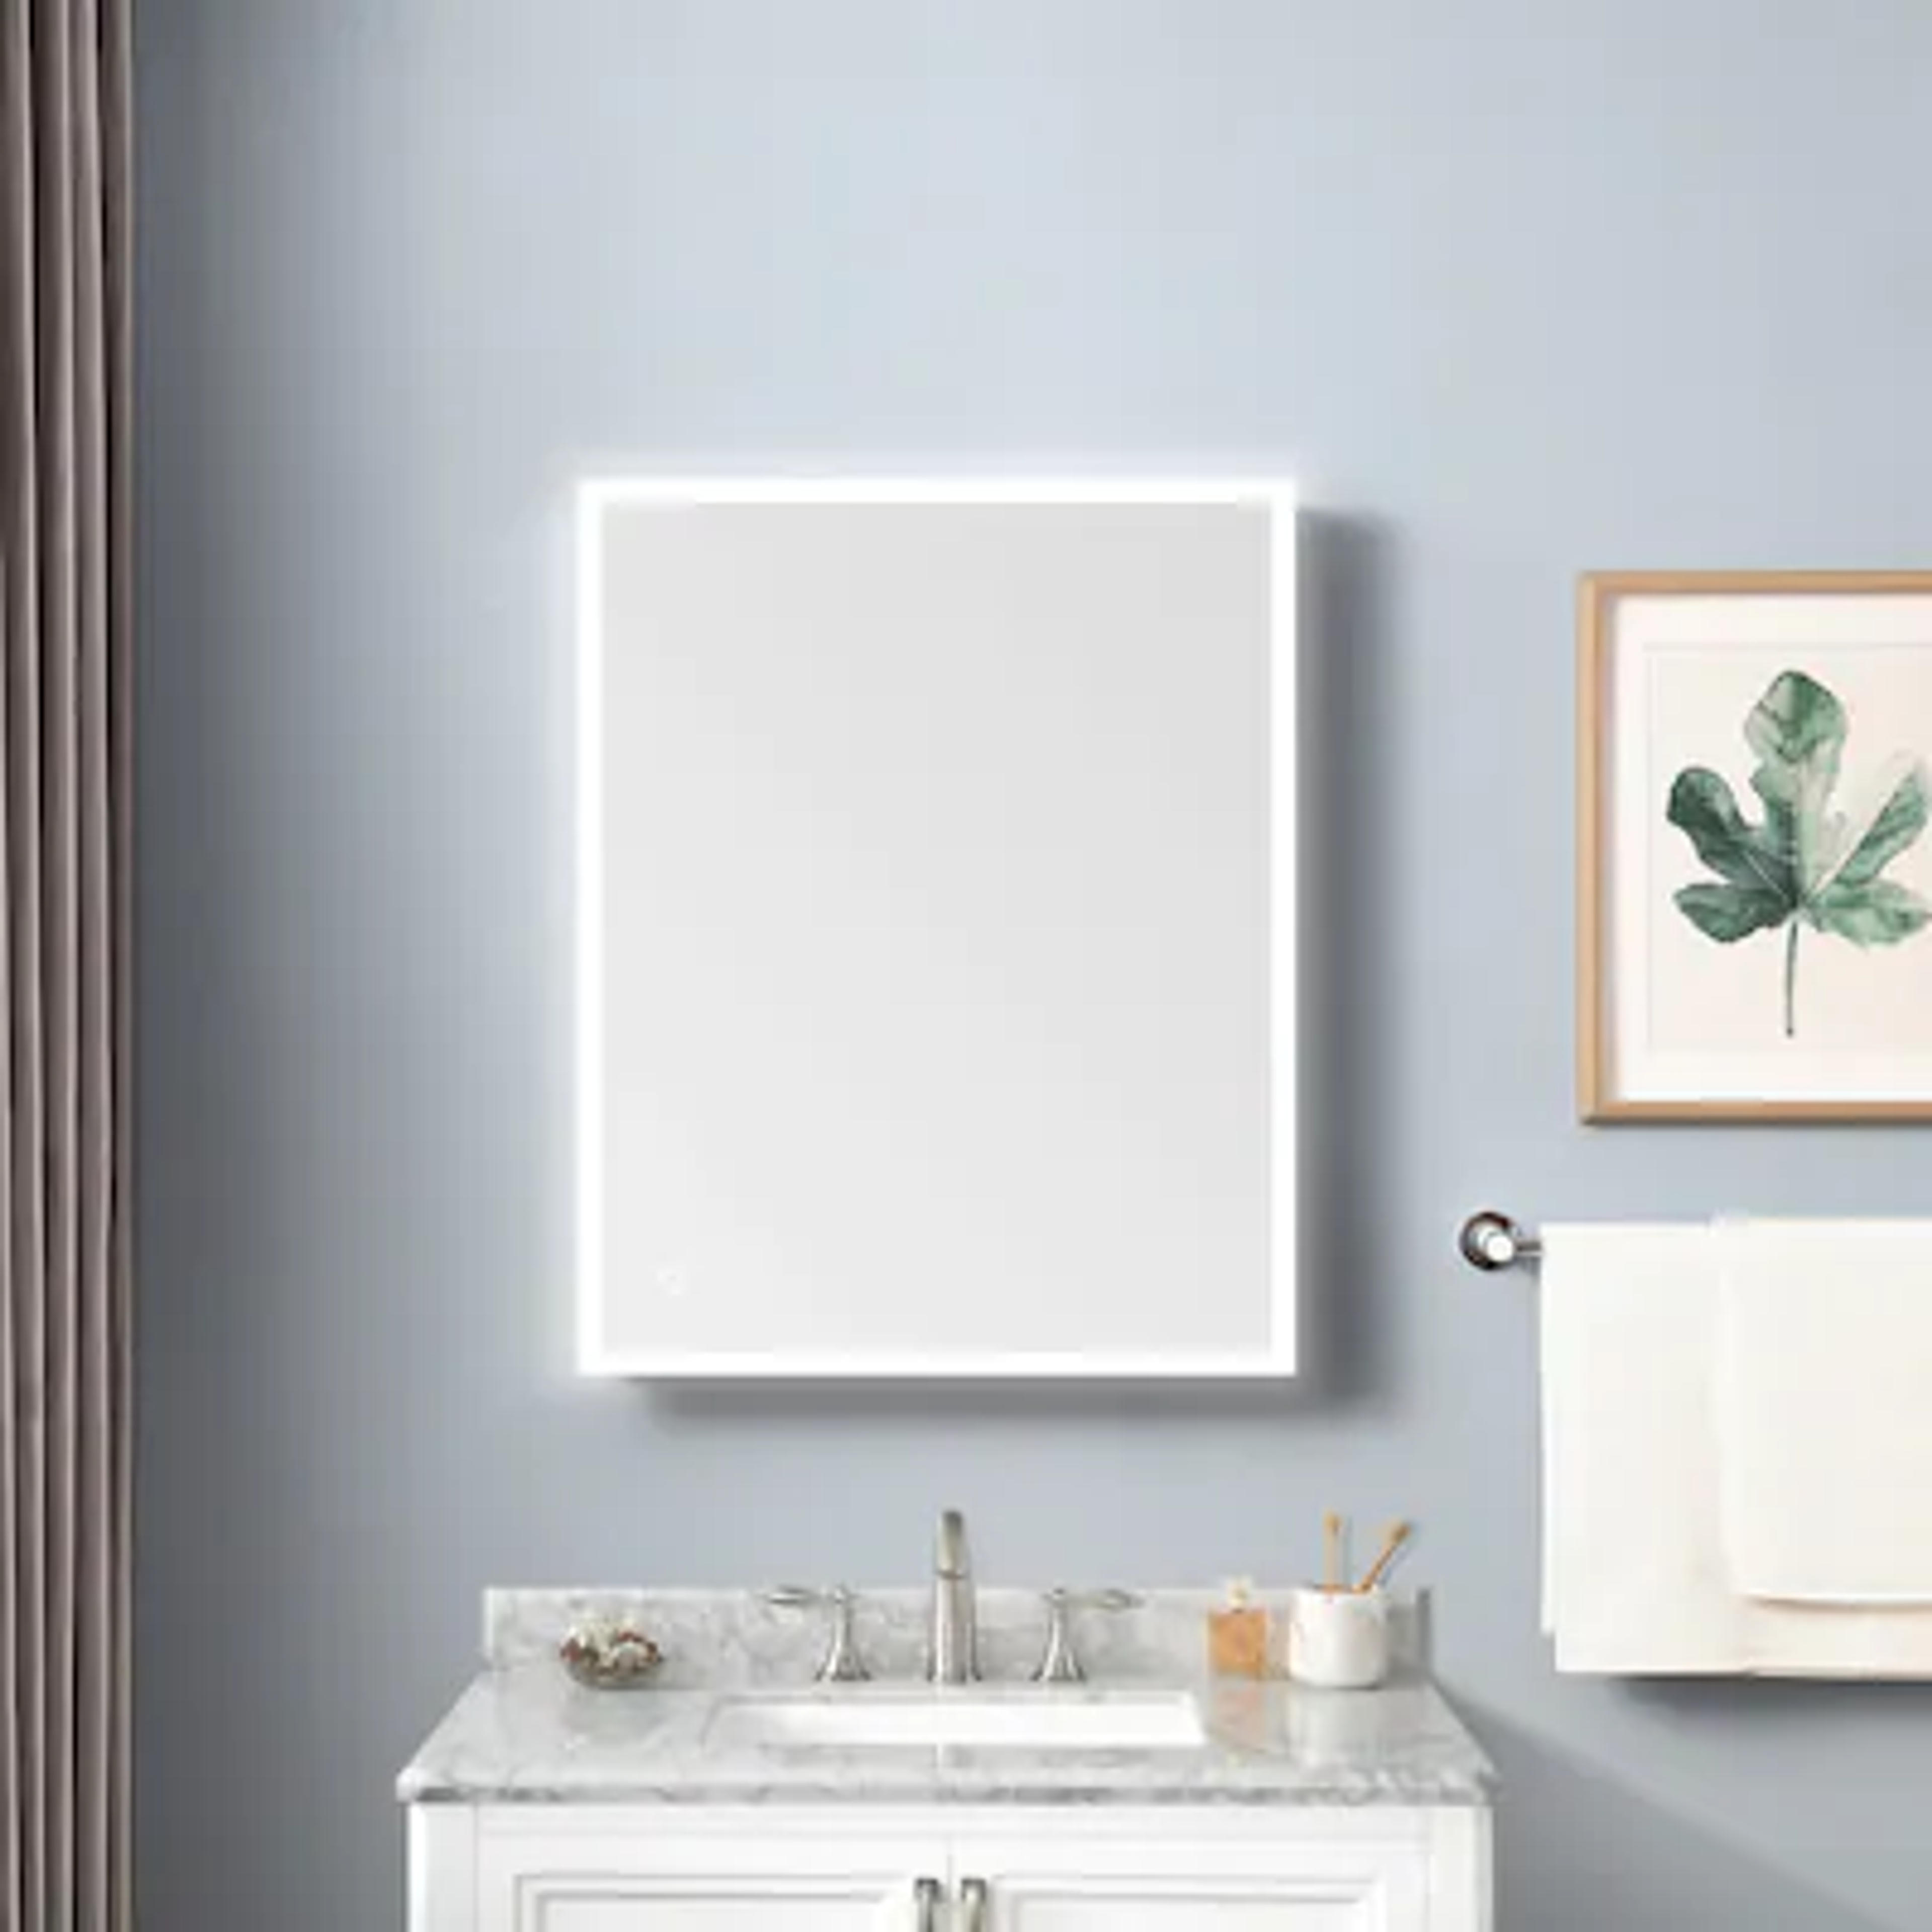 allen + roth Landen 24-in x 30-in Lighted LED Surface/Recessed Mount Silver Mirrored Rectangle Soft Close Medicine Cabinet with Outlet Lowes.com